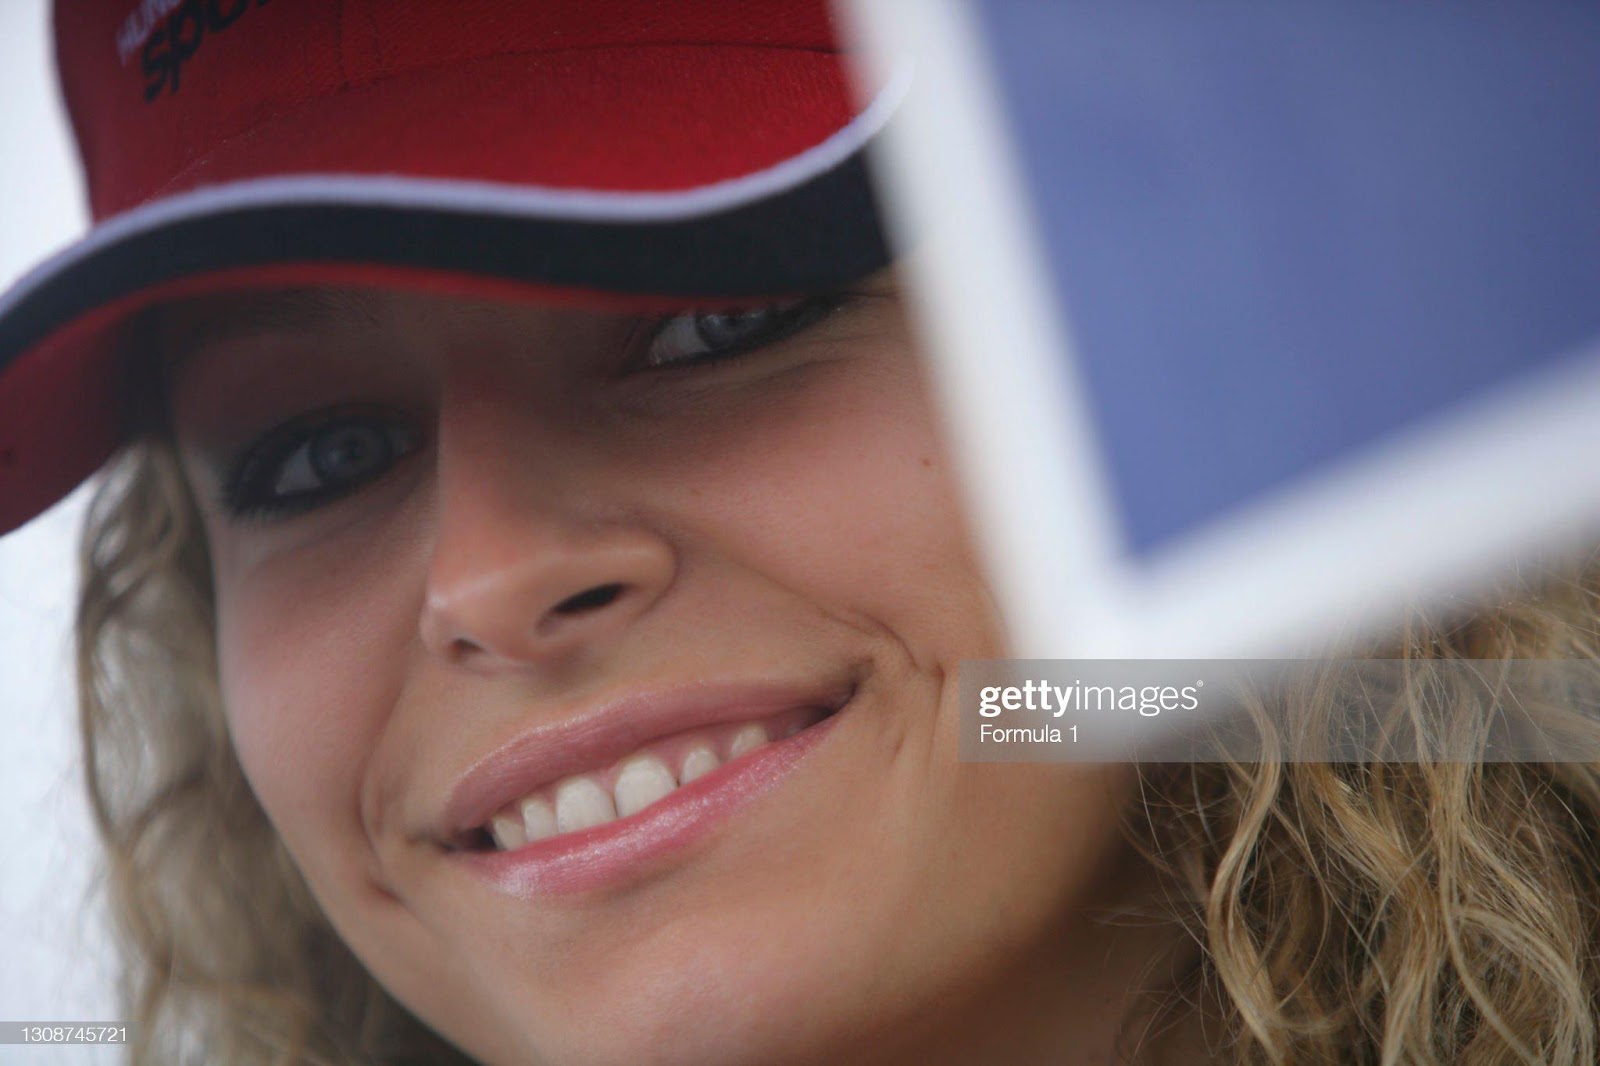 D:\Documenti\posts\posts\Women and motorsport\foto\Getty e altre\Budapest\seriesround-9-hungaroring-budapest-hungary-6th-august-2006-sunday-picture-id1308745721.jpg